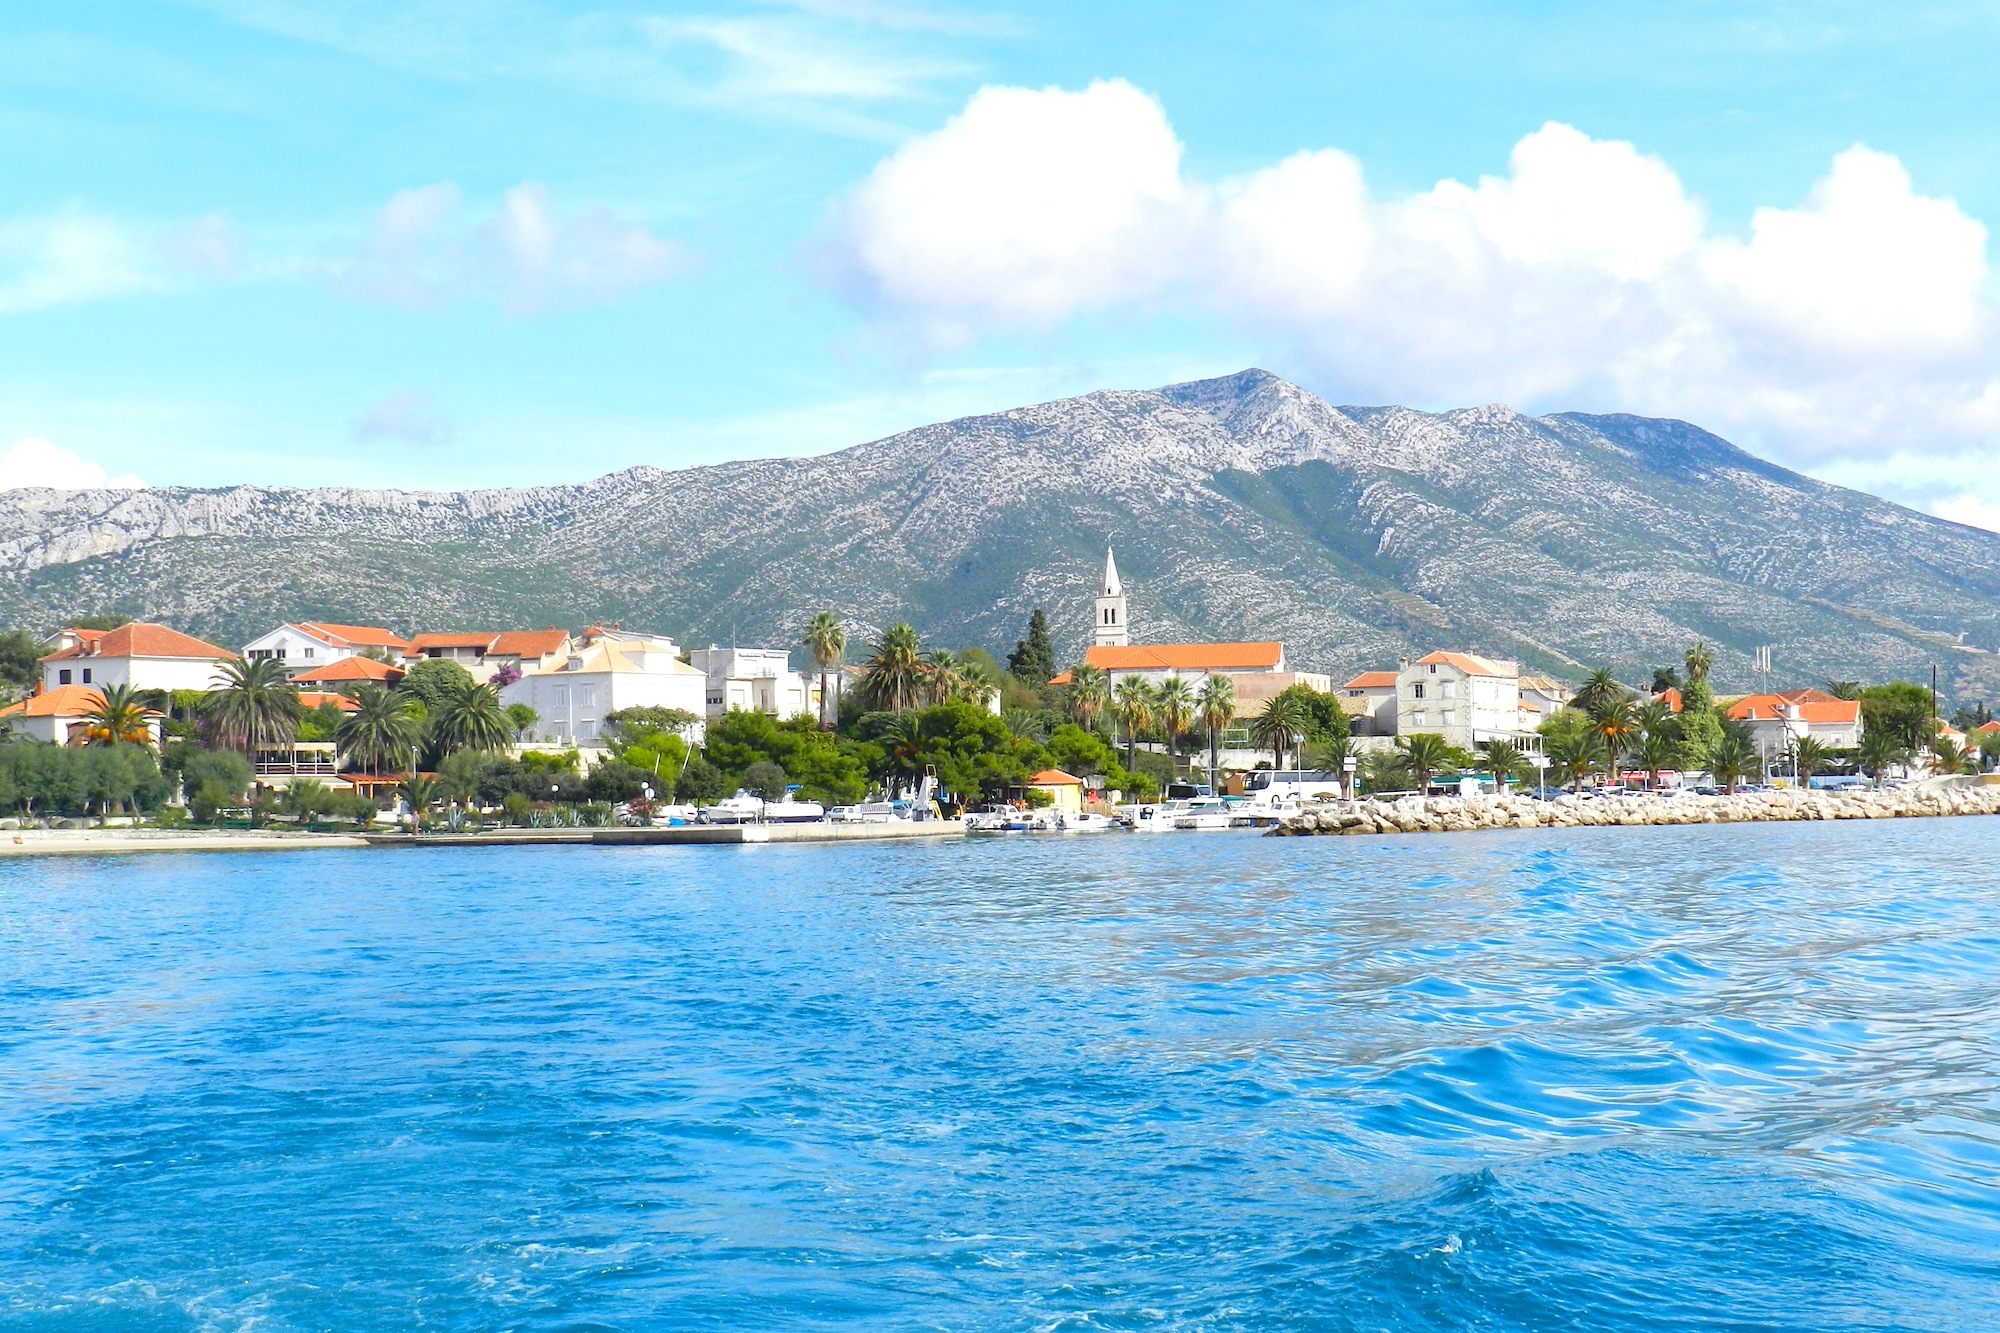 Korcula – Birthplace of Marco Polo